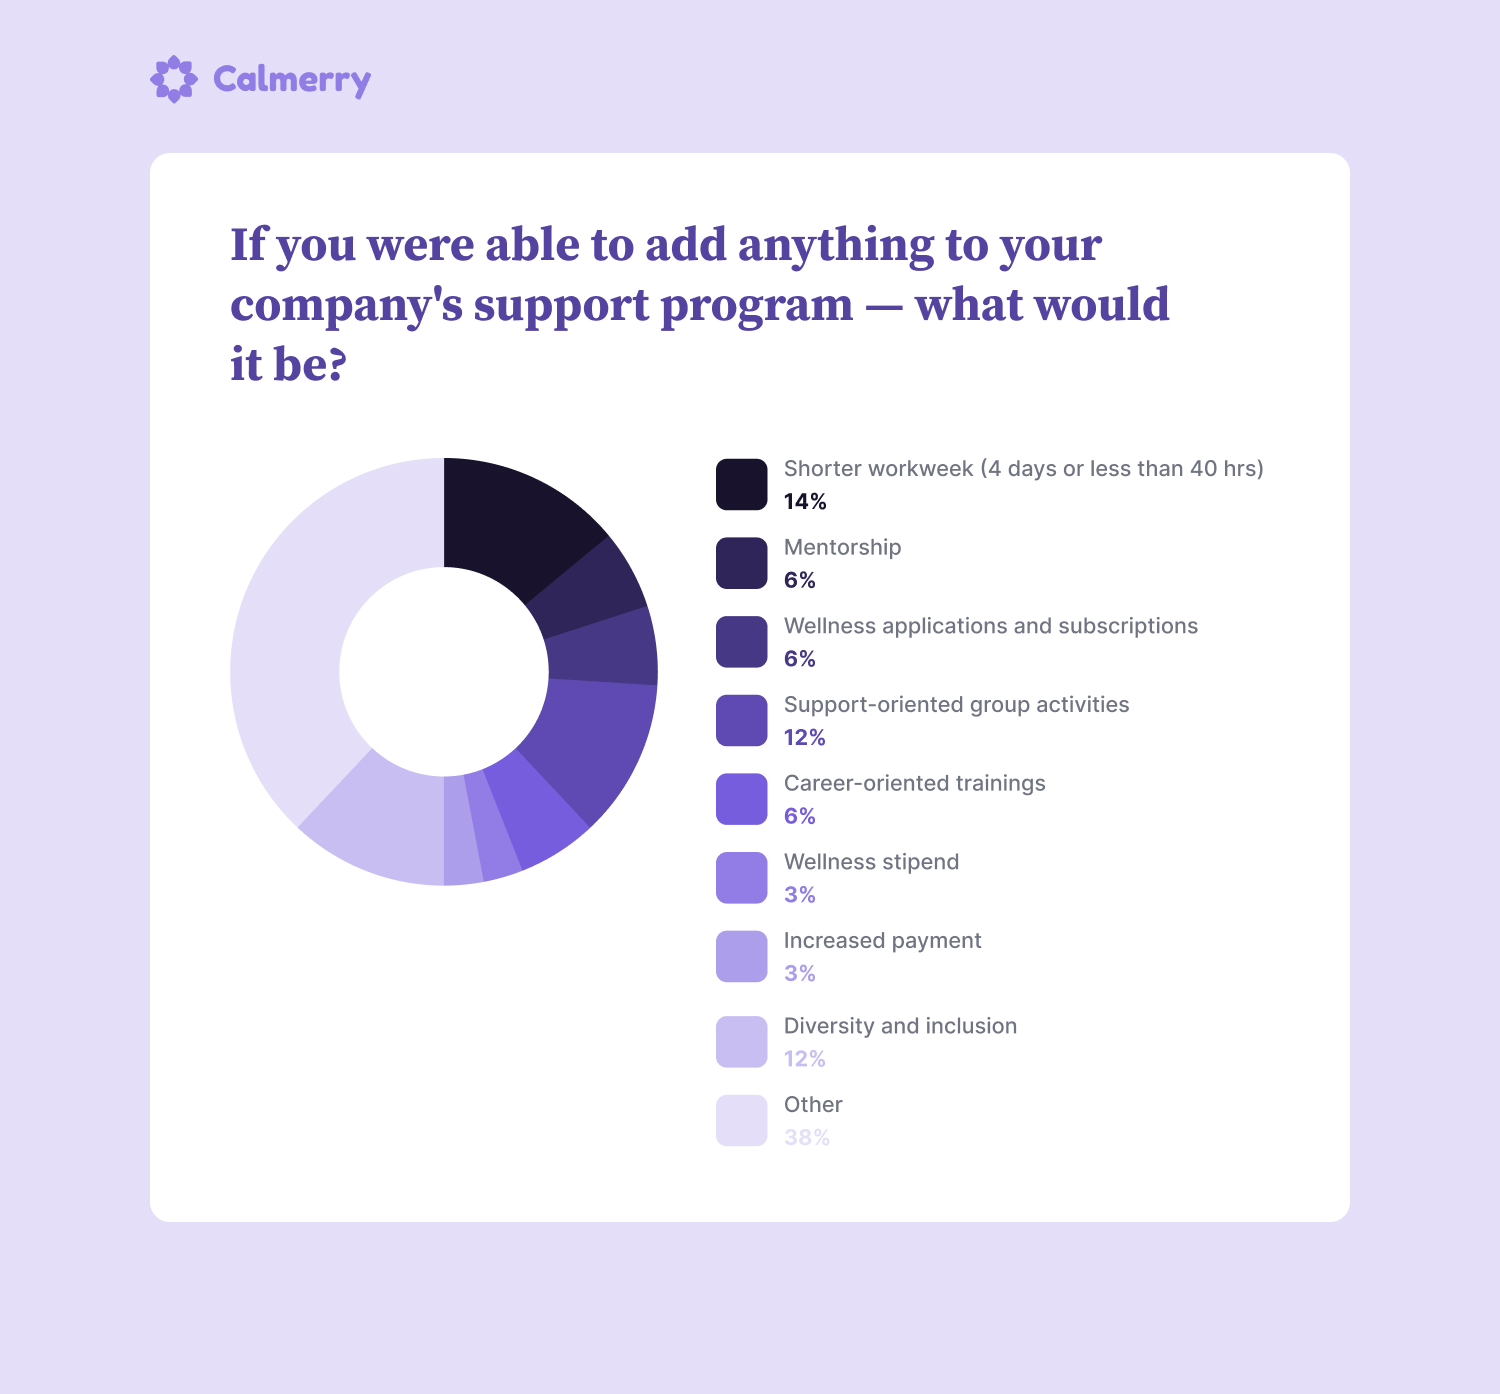 If you were able to add anything to your company's support program — what would it be? Shorter workweek (4 days or less than 40 hrs) 14% Mentorship 6% Wellness applications and subscriptions 6% Support-oriented group activities 12% Career-oriented trainings 6% Wellness stipend 3% Increased payment 3% Diversity and inclusion 12%